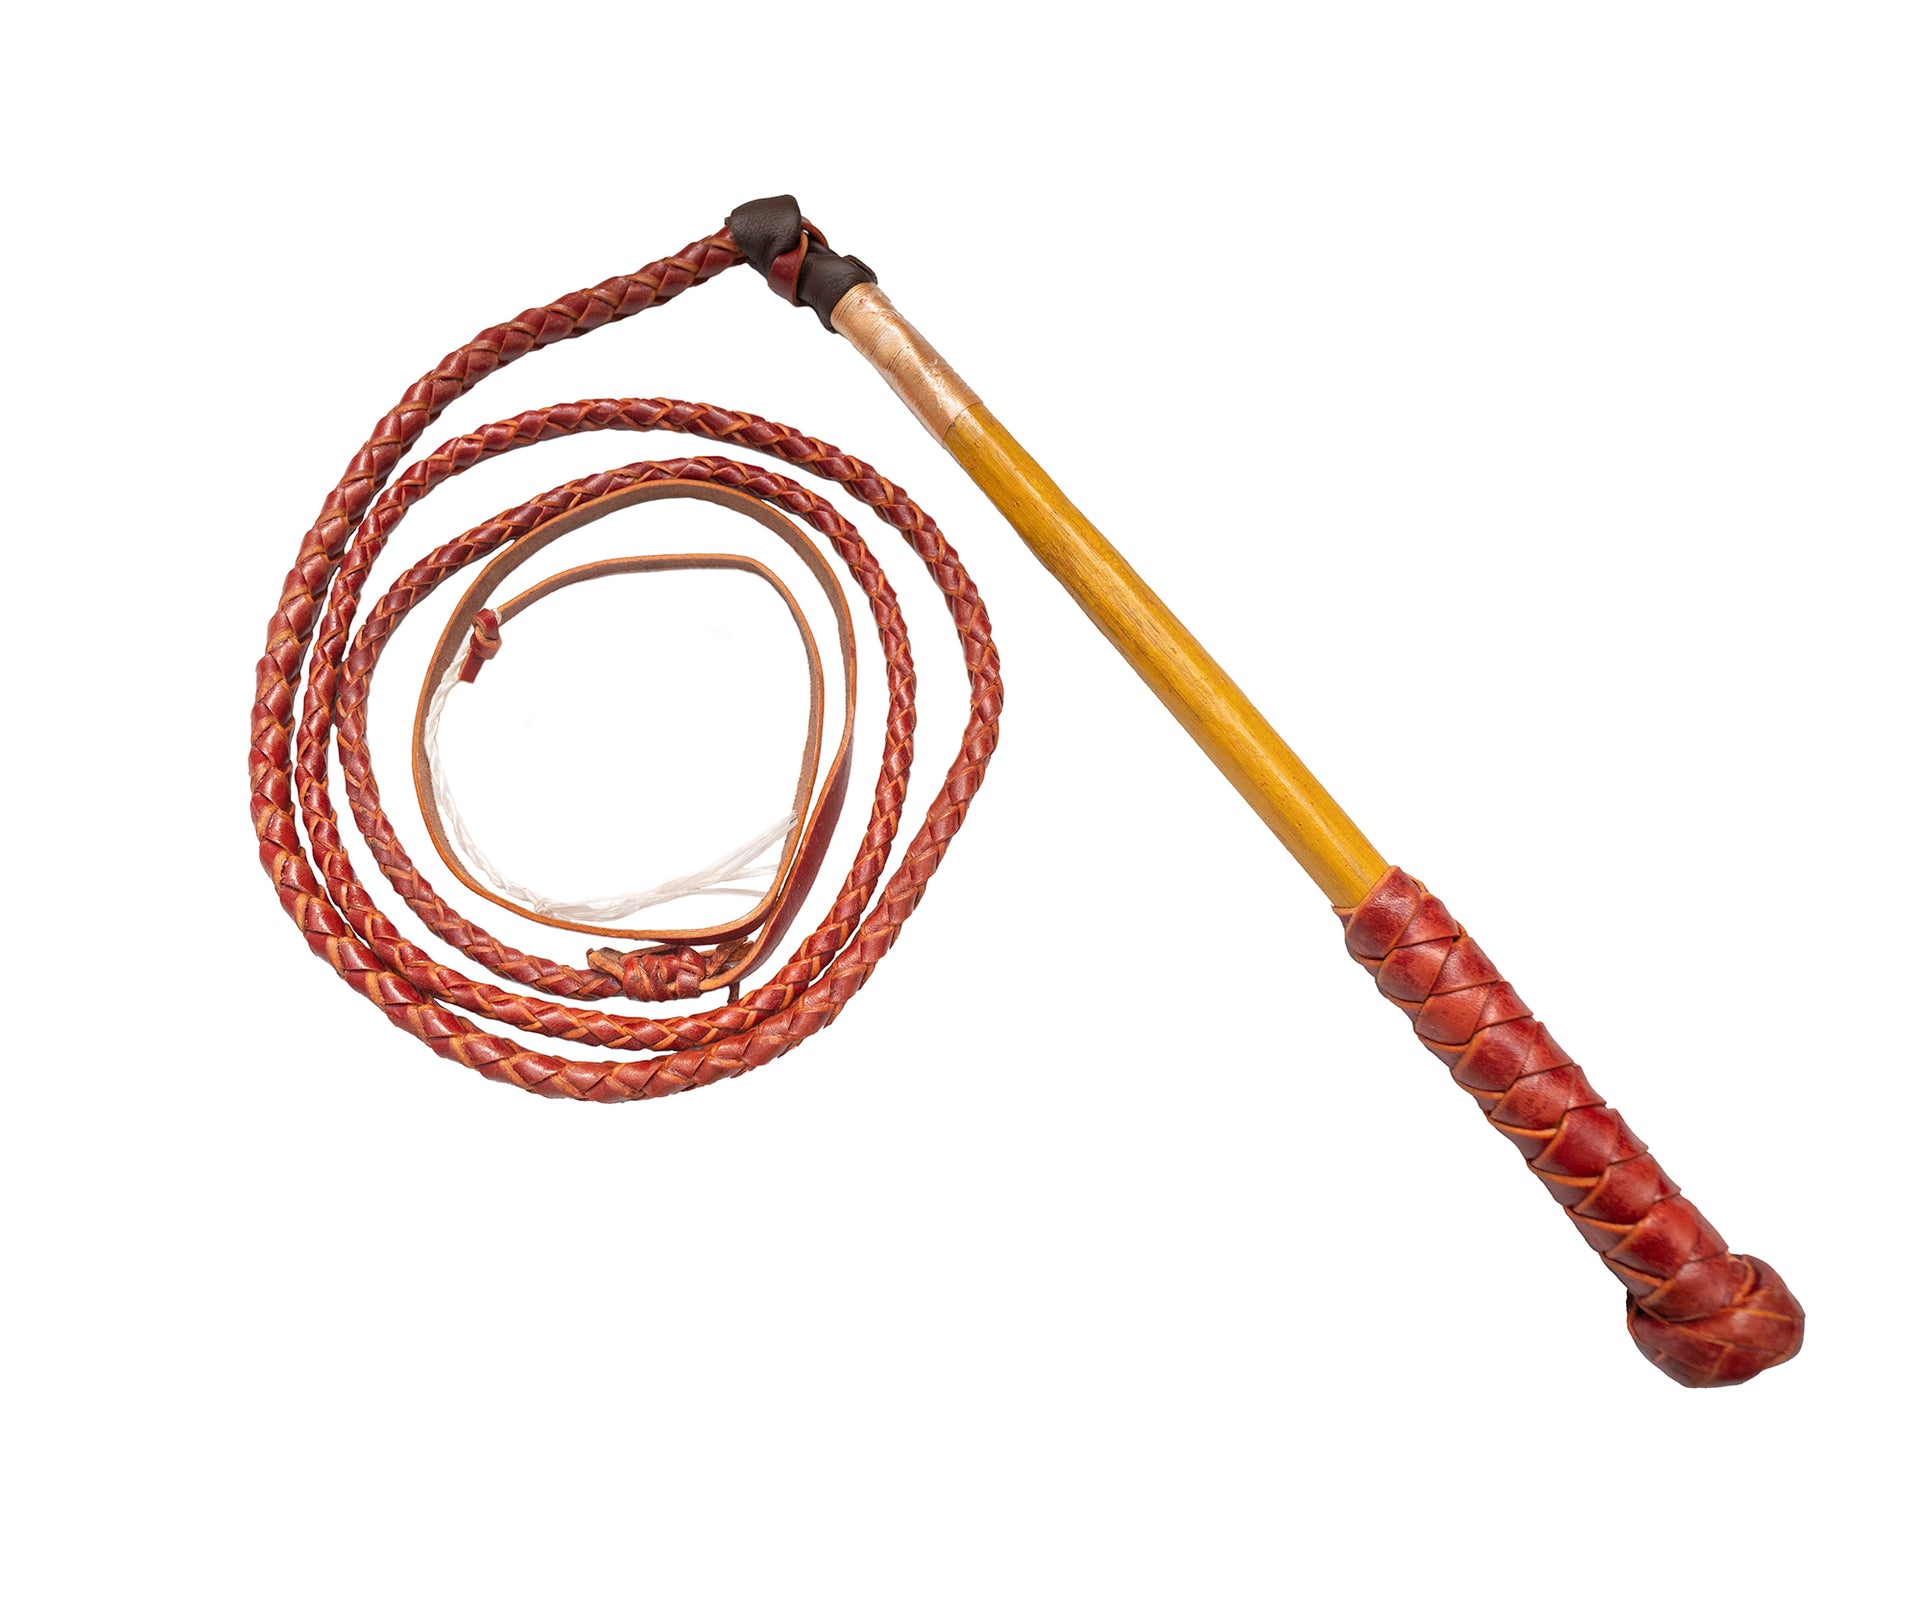 Stockmaster Redhide Stock Whip 7' x 6 Plait - The Trading Stables